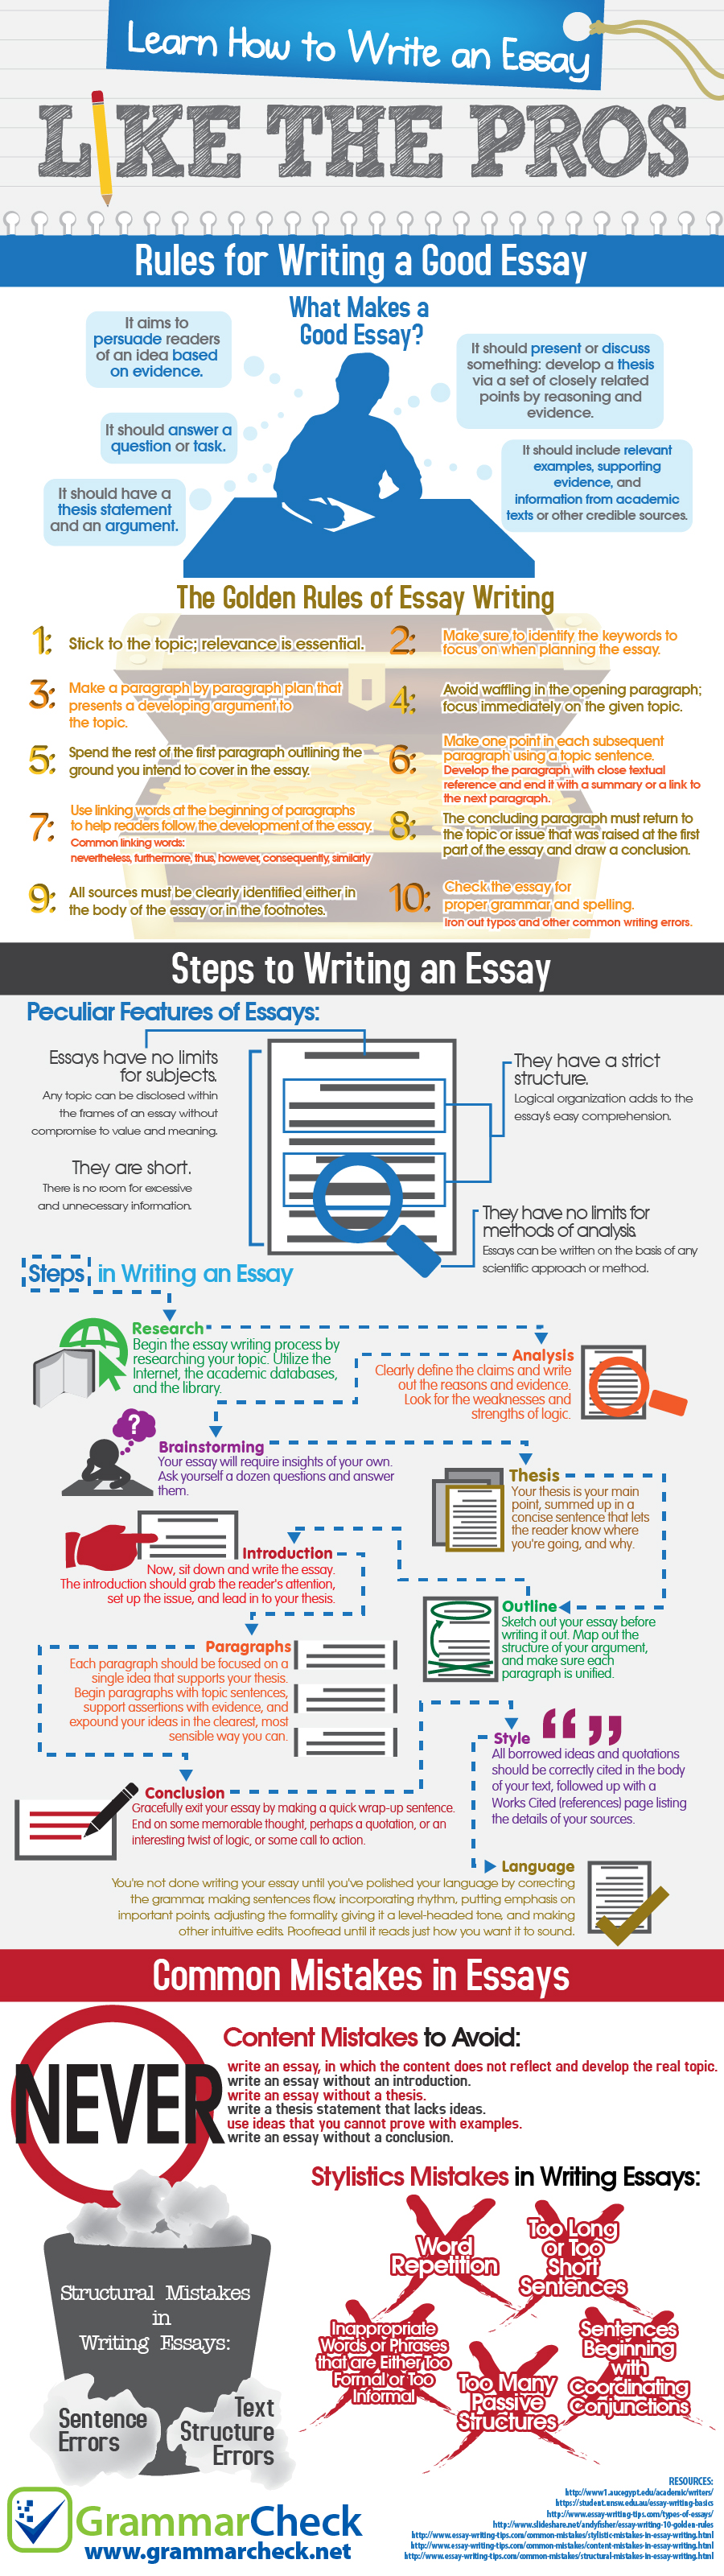 12 Online Tools for Students To Improve Their Essay Writing